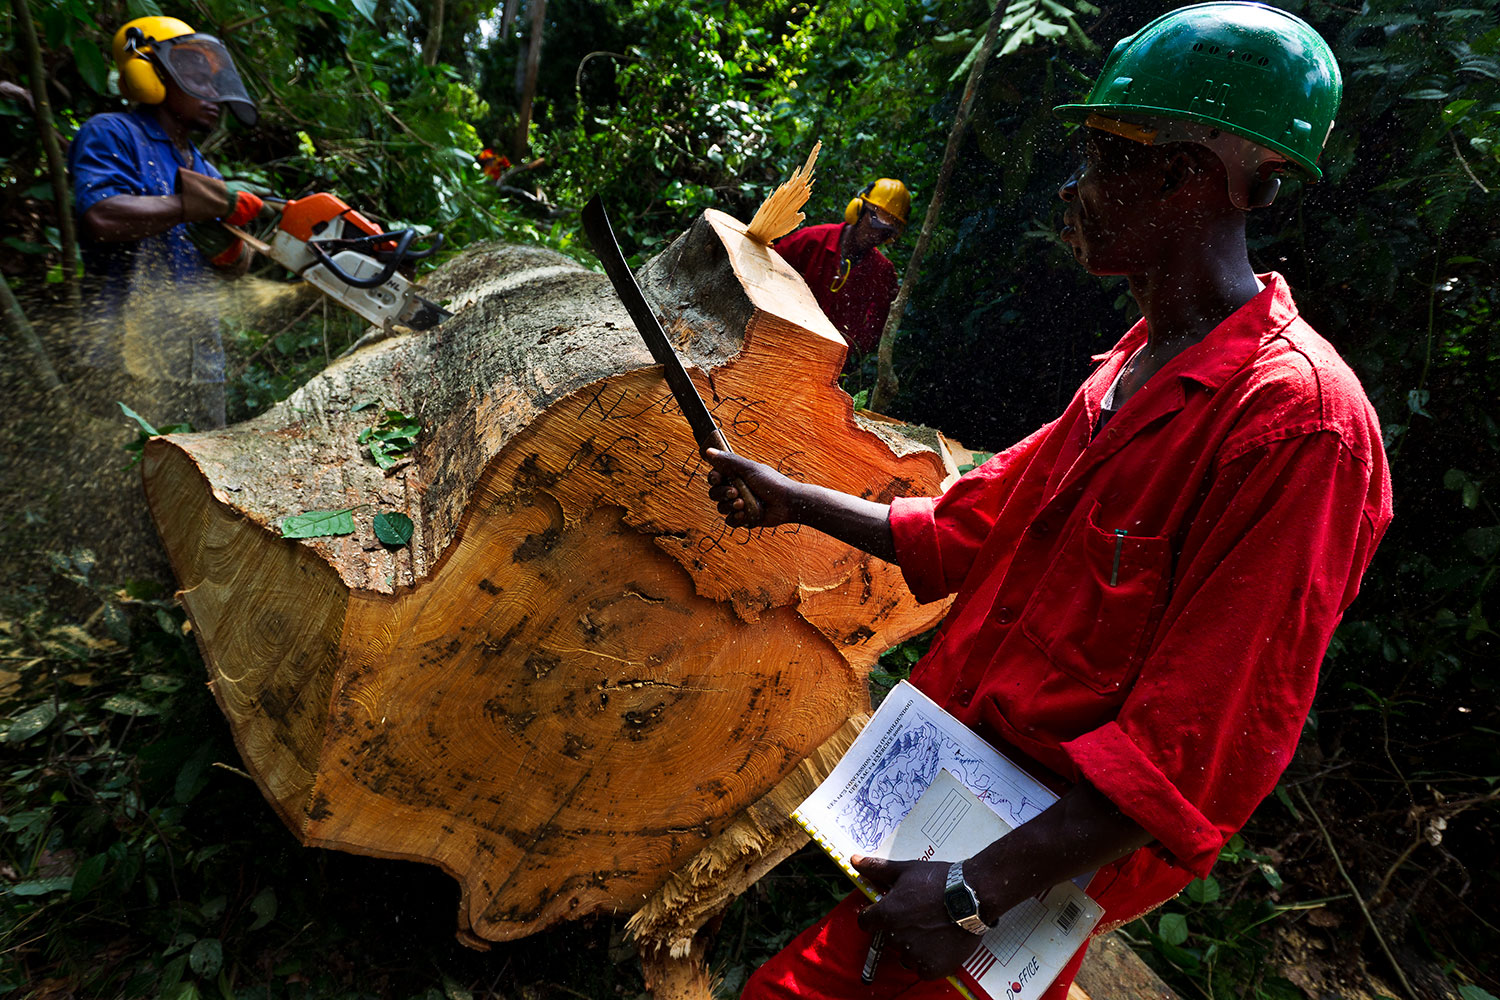 Loggers work in the natural forest around the logging concession in the Kika region of Cameroon on June 6, 2010.